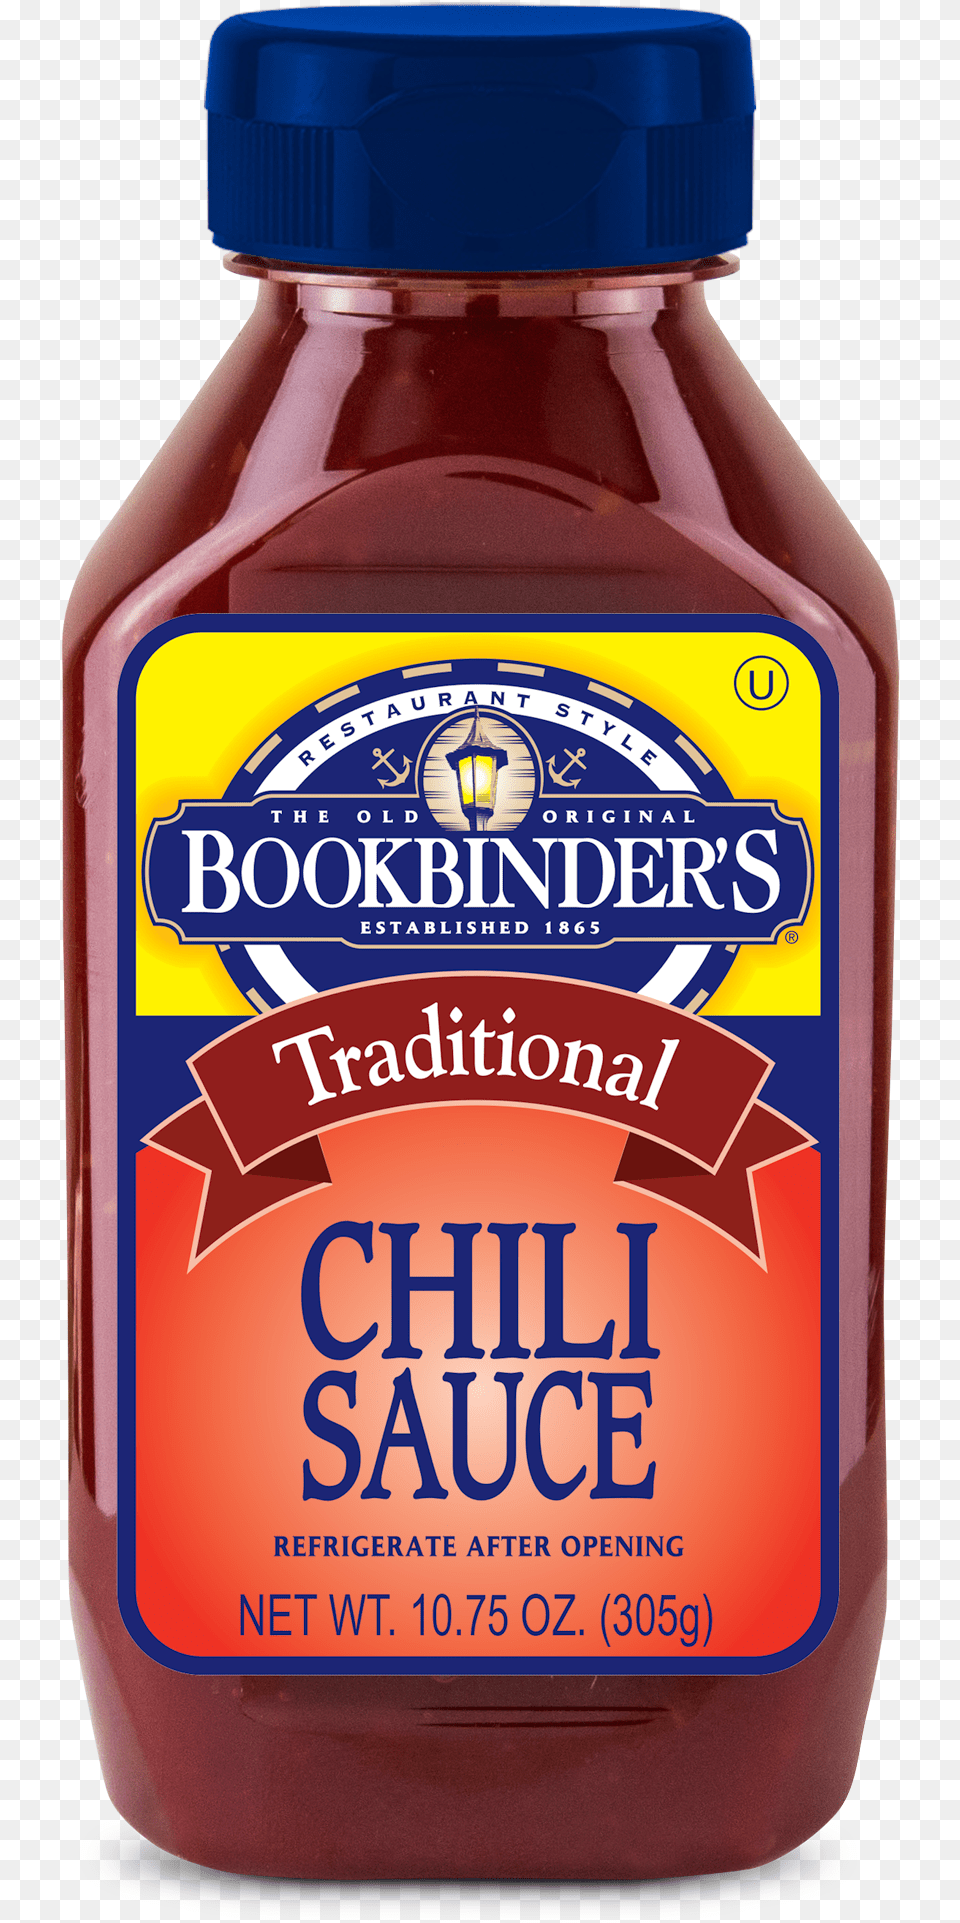 Chili Sauce Bottle, Food, Cosmetics, Perfume, Ketchup Free Png